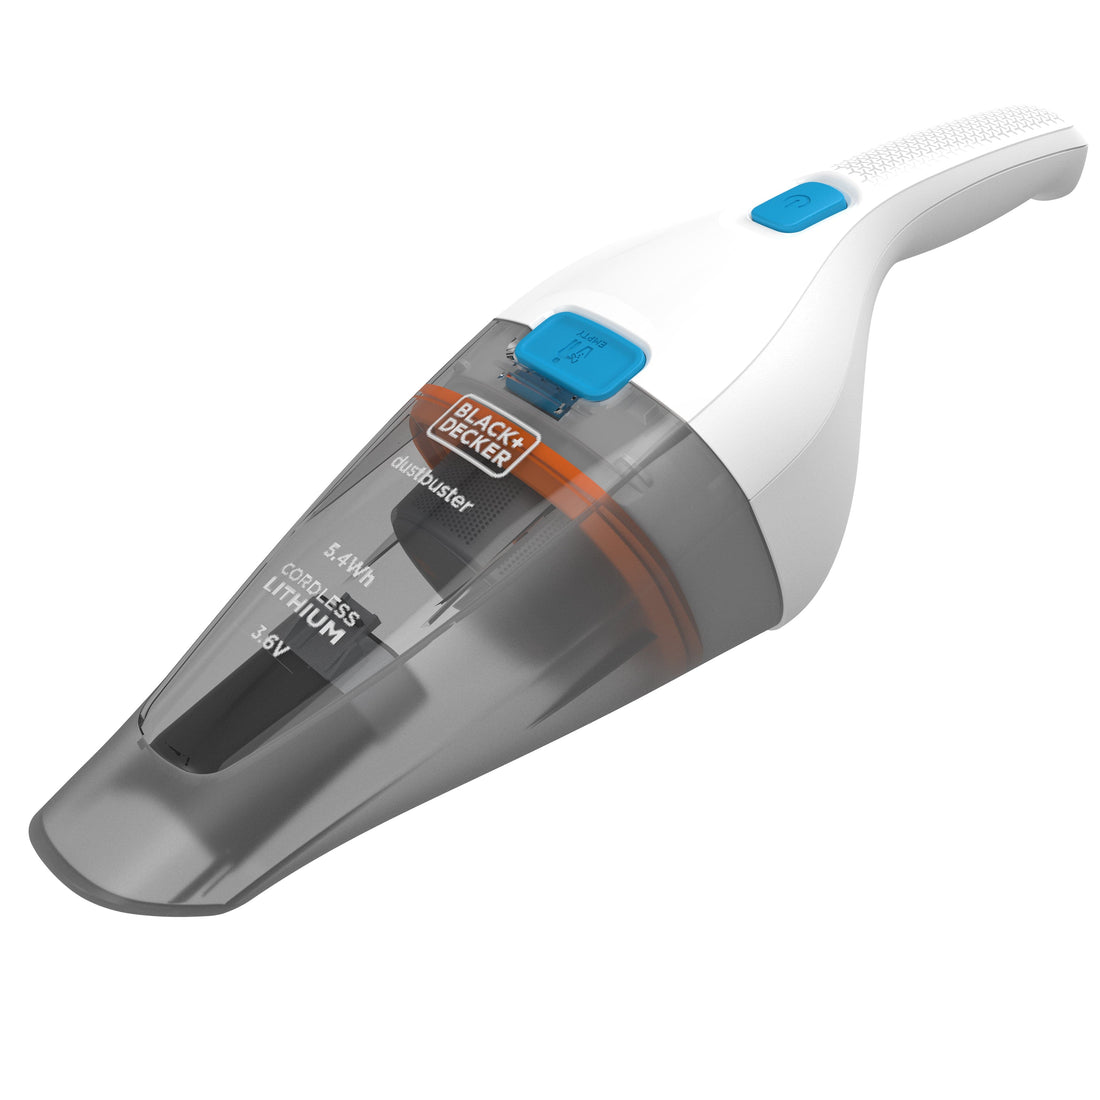 DUSTBUSTER 5.4 WH (3.6 V - 1.5 AH) - LITHIUM TECHNOLOGY - DOUBLE FILTER SYSTEM